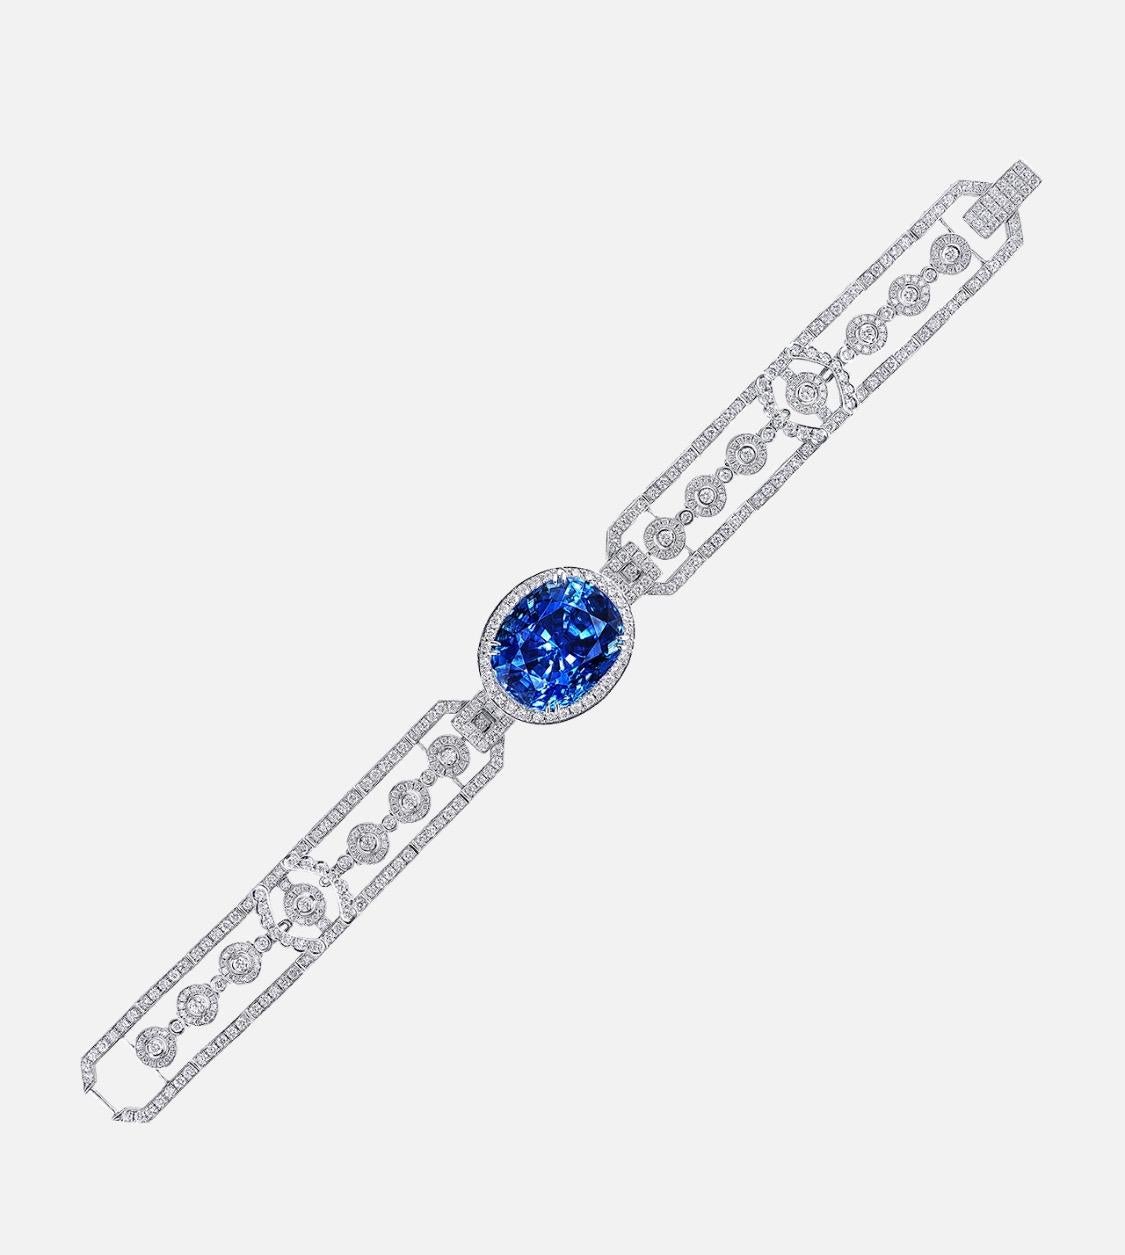 From the Museum Vault at Emilio Jewelry in New York,

A magnificent untreated natural vivid blue sapphire sits in the center of this bracelet. Please inquire for more information or additional images. 